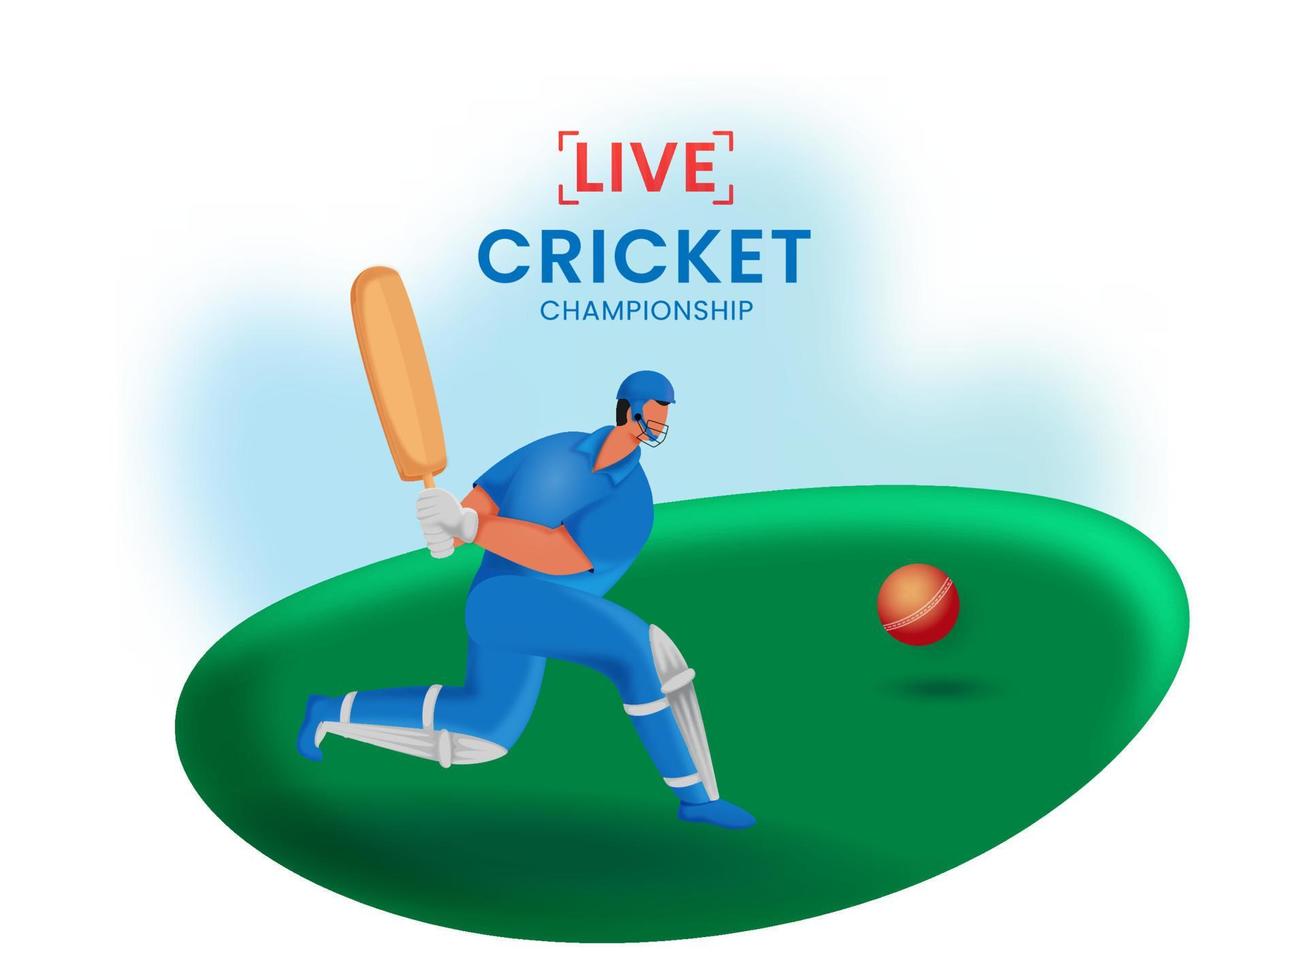 Line Cricket Championship Concept With Cartoon Batsman In Playing Pose. vector